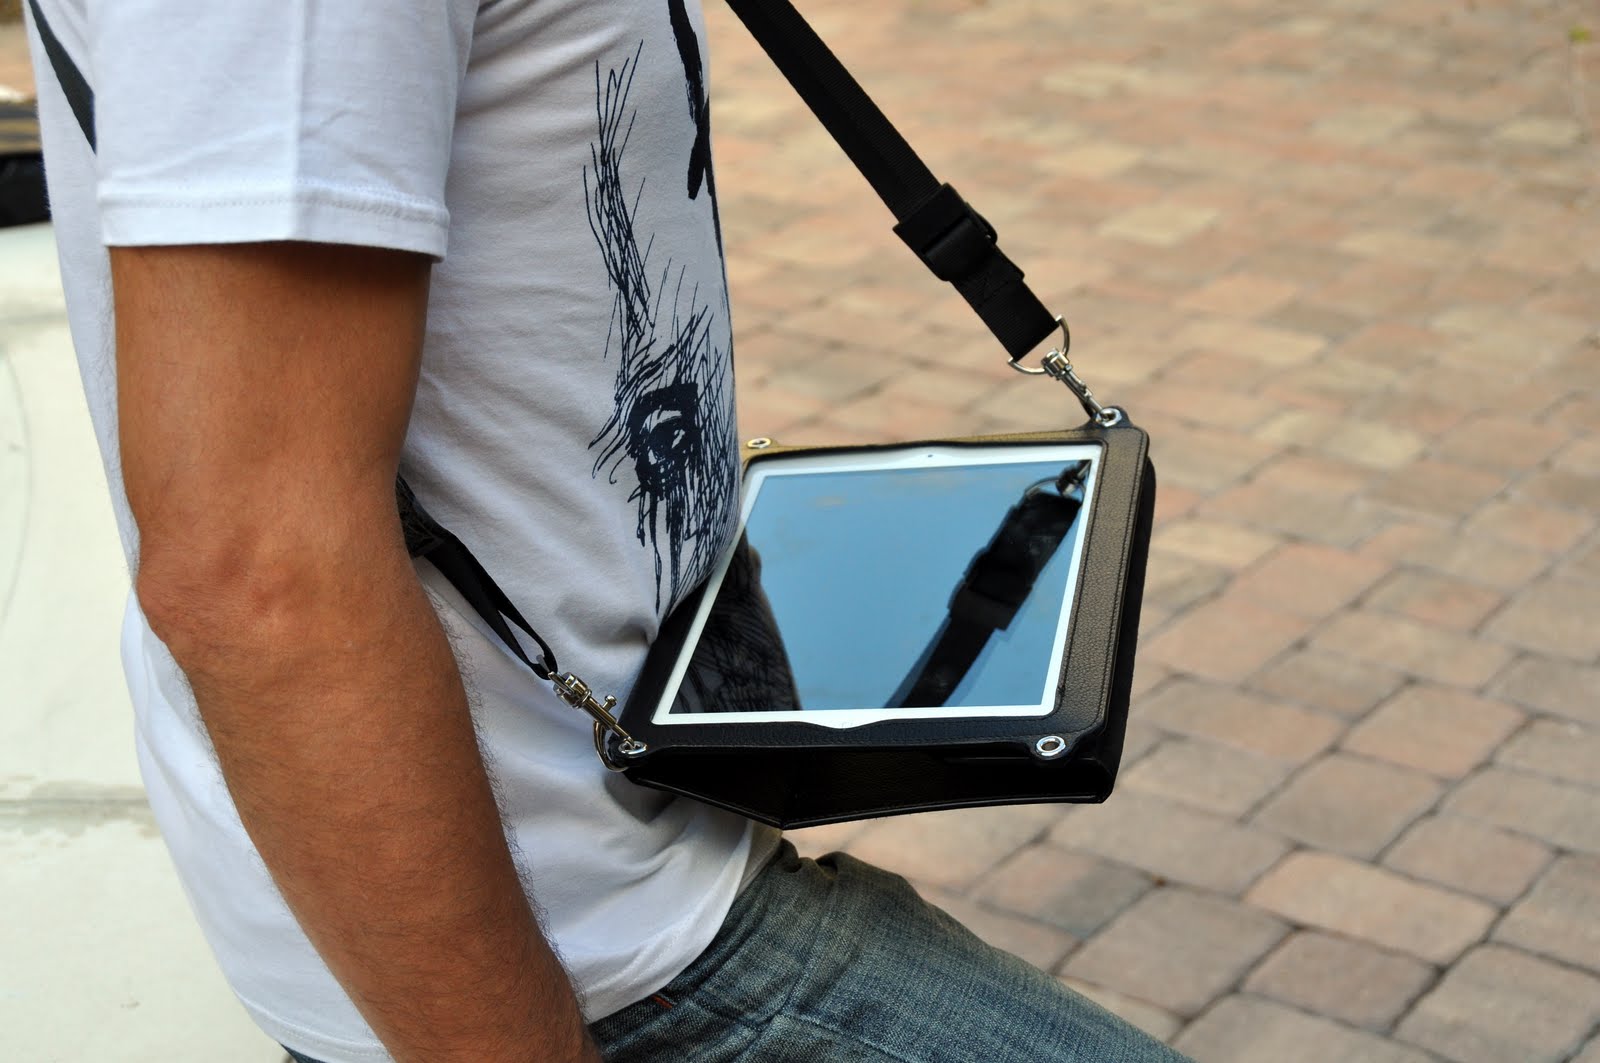 Hands-free iPad case Across in use. Type with both hands.